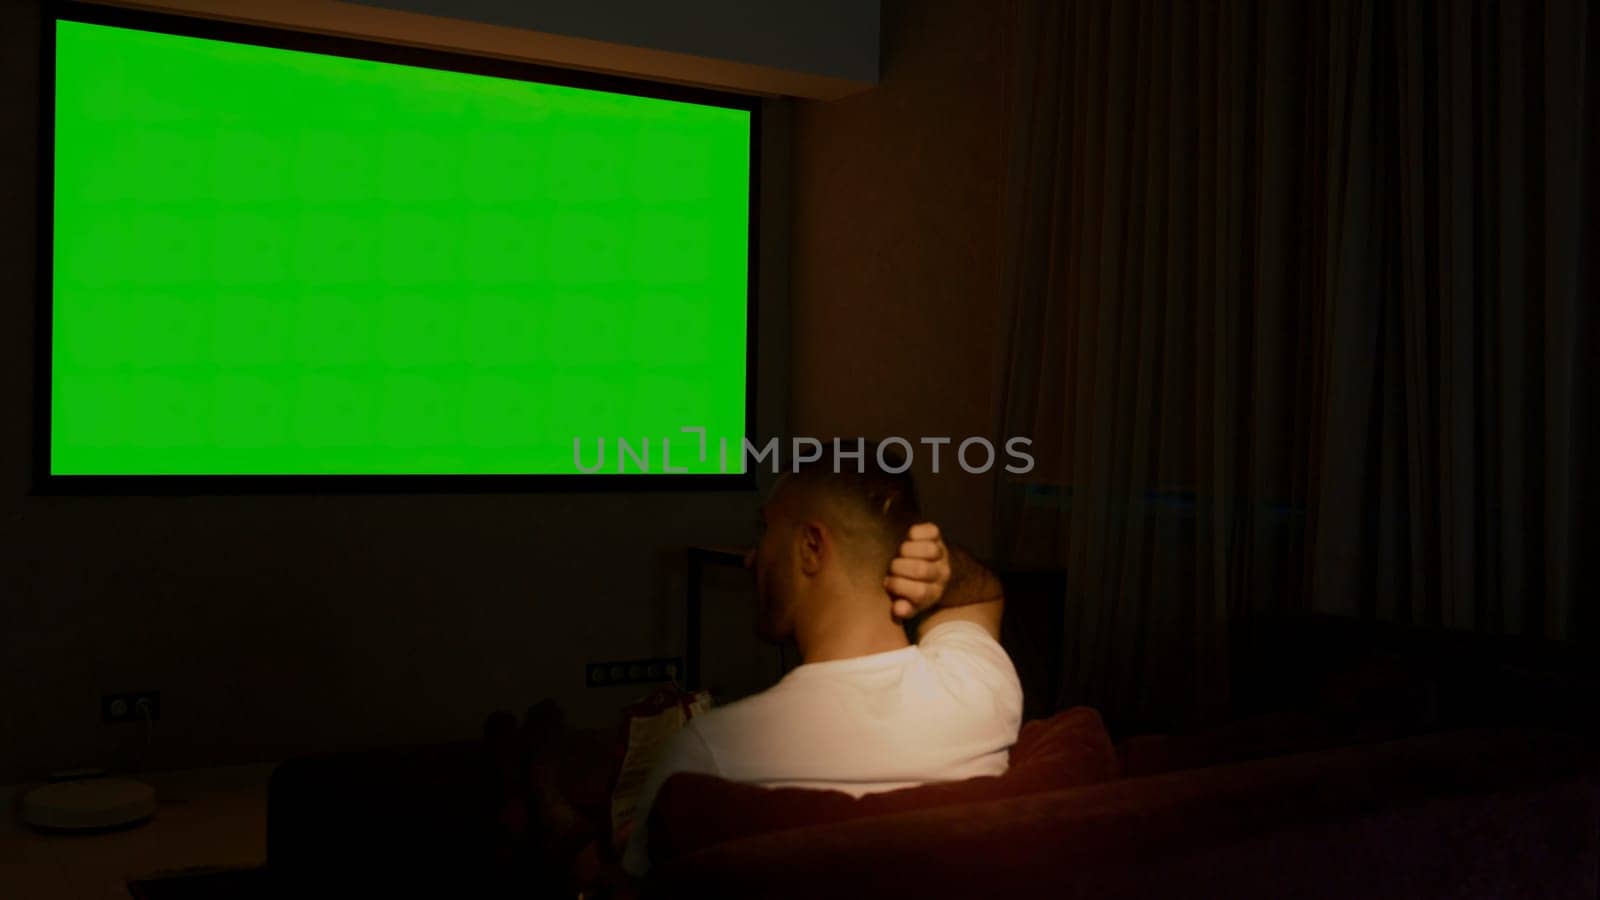 Viewing on a projector in a closed room. Media. A man looking into a green screen that is shown on a large screen. High quality 4k footage